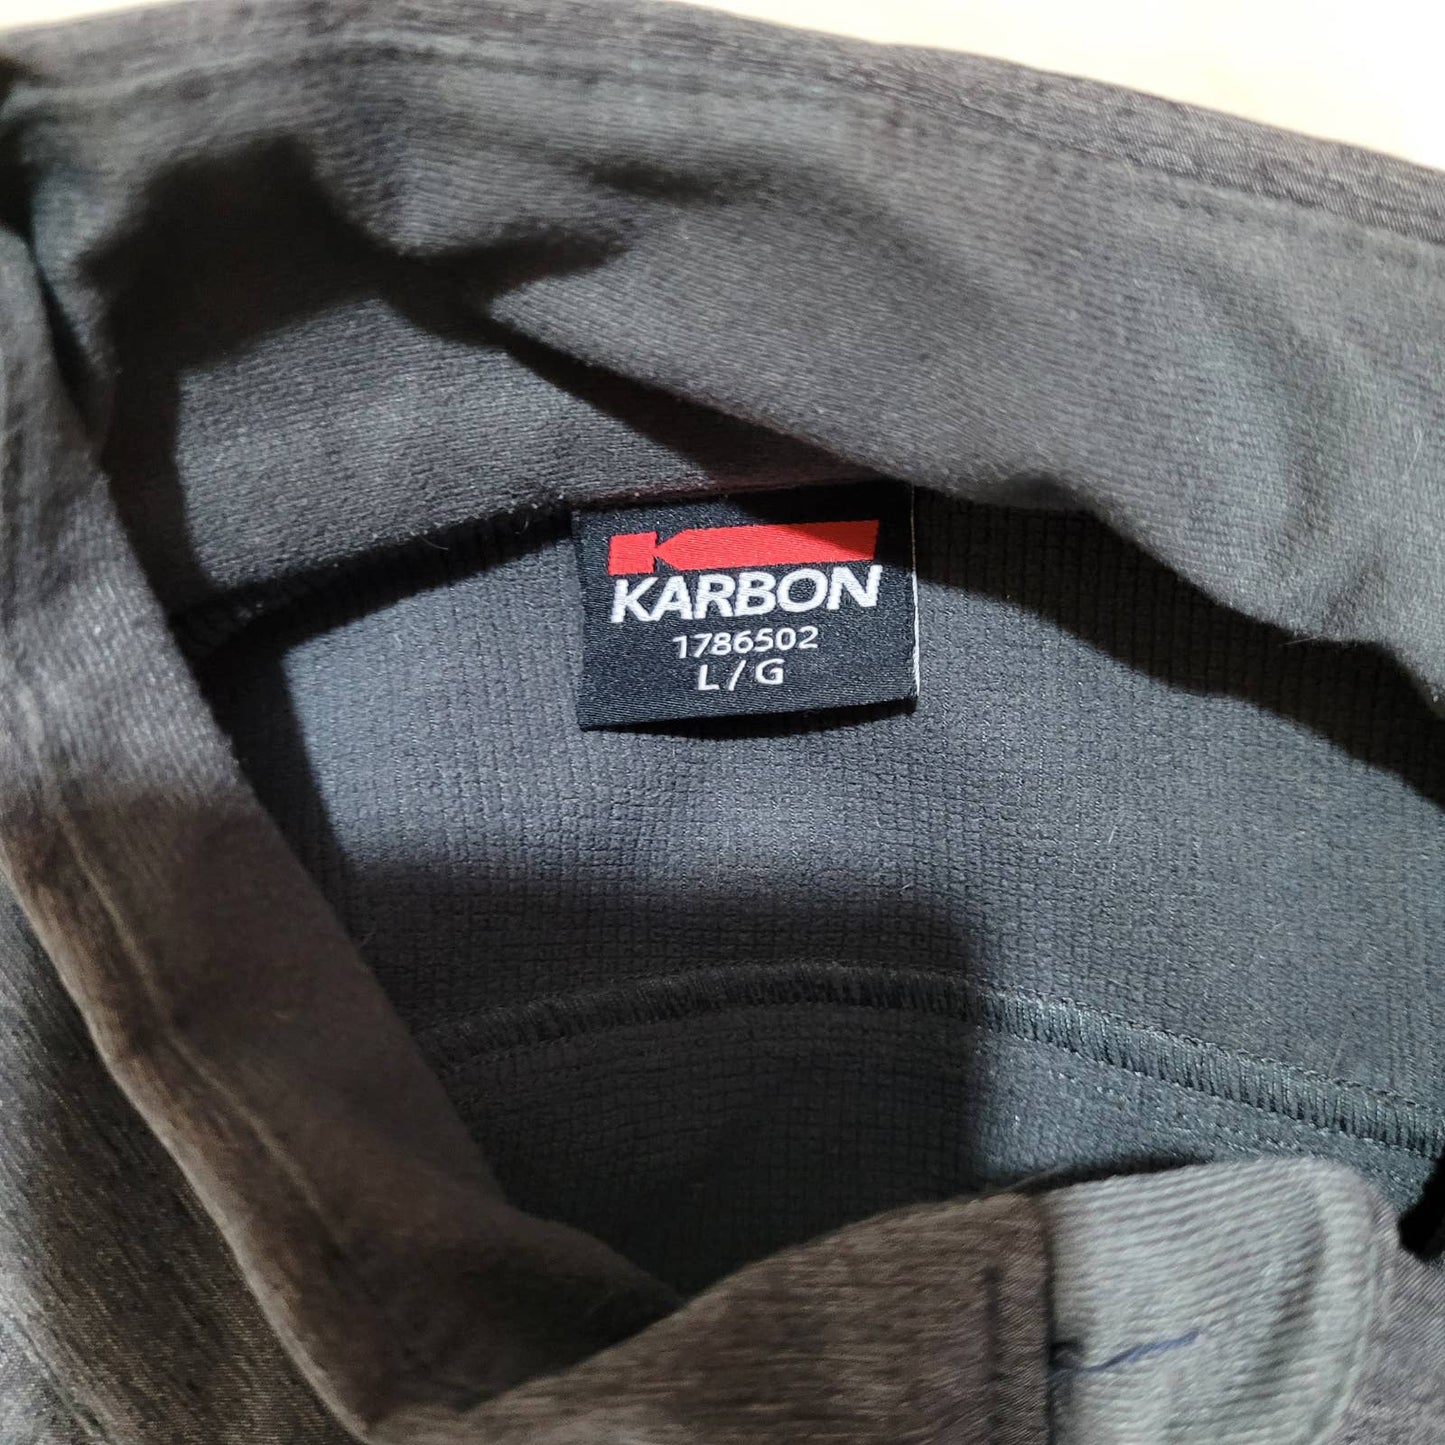 Karbon Gray Softshell Jacket with Pink Zipper - Size Large